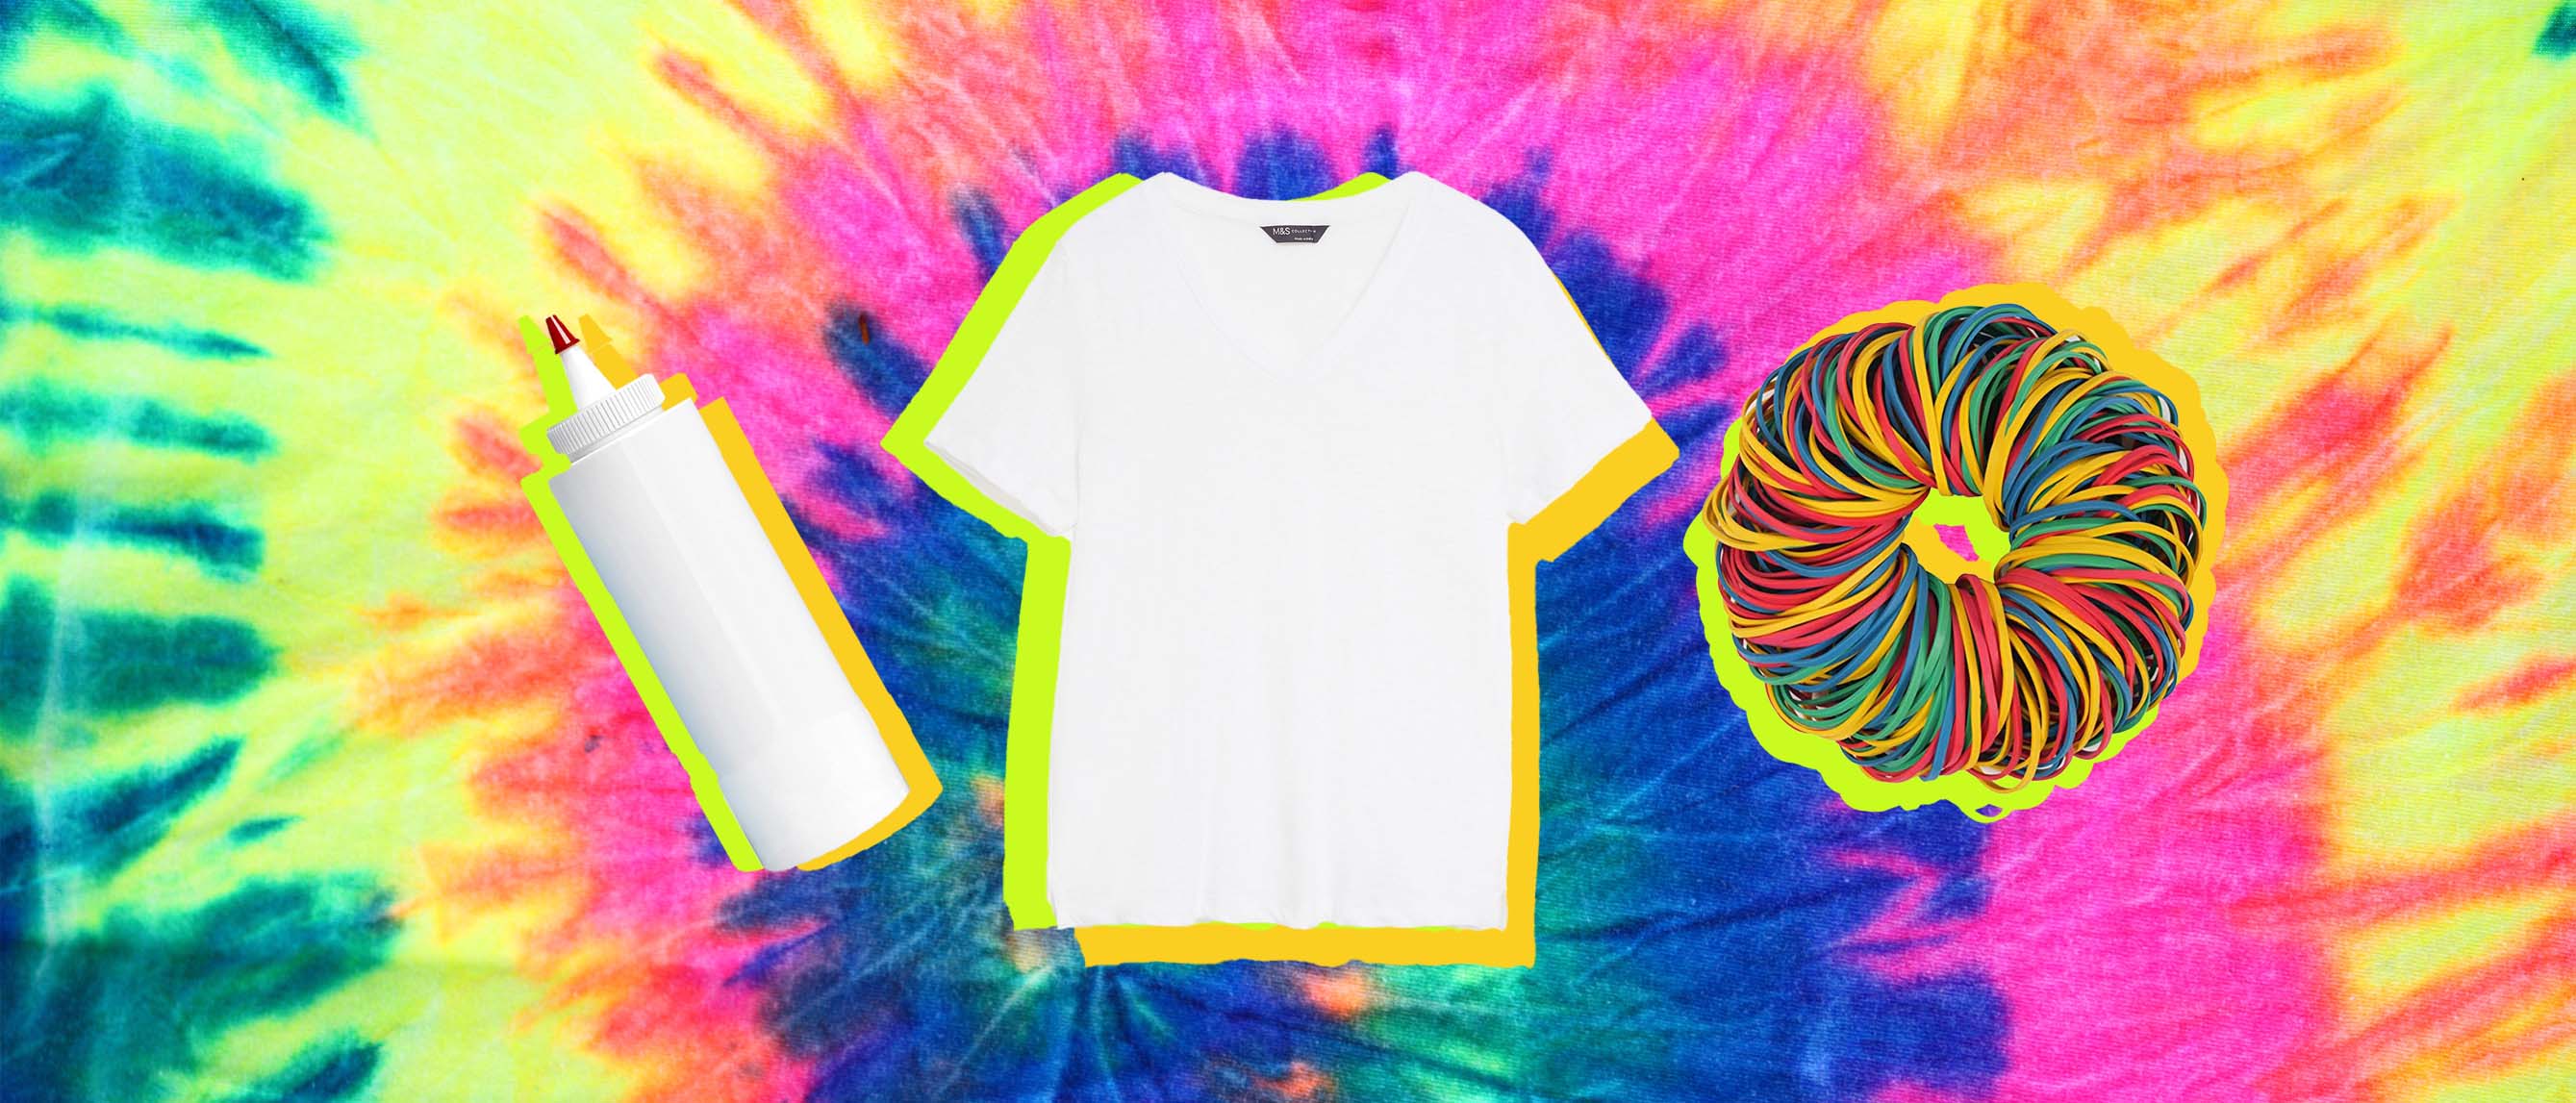 Have you tried the new tie dye collection?